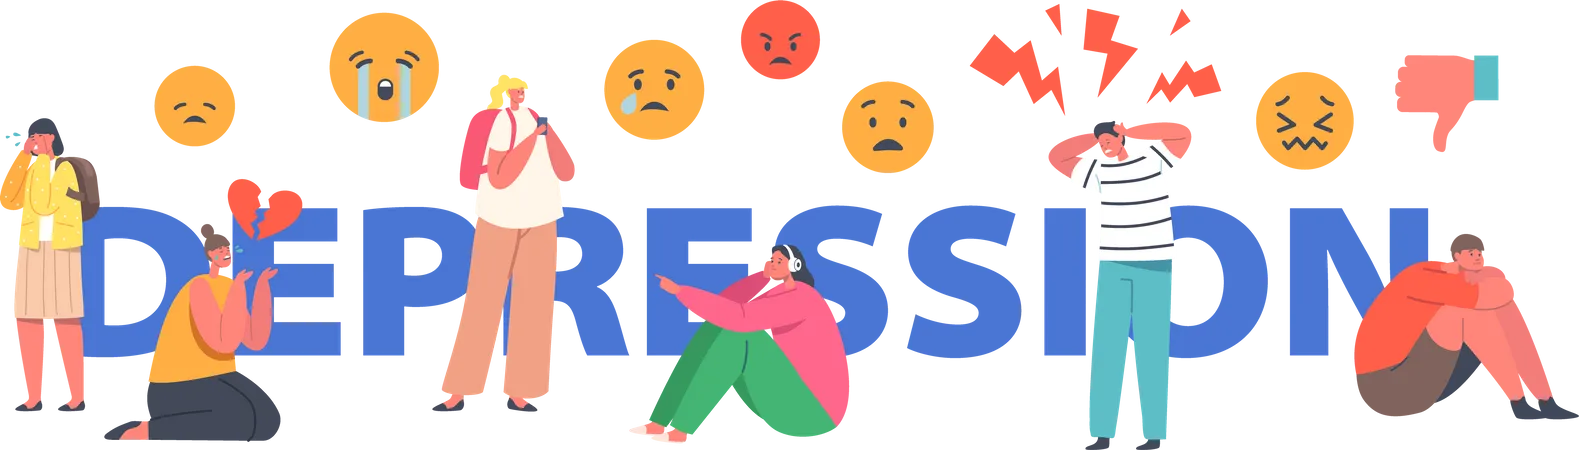 Kids suffering Stress and Depression  Illustration